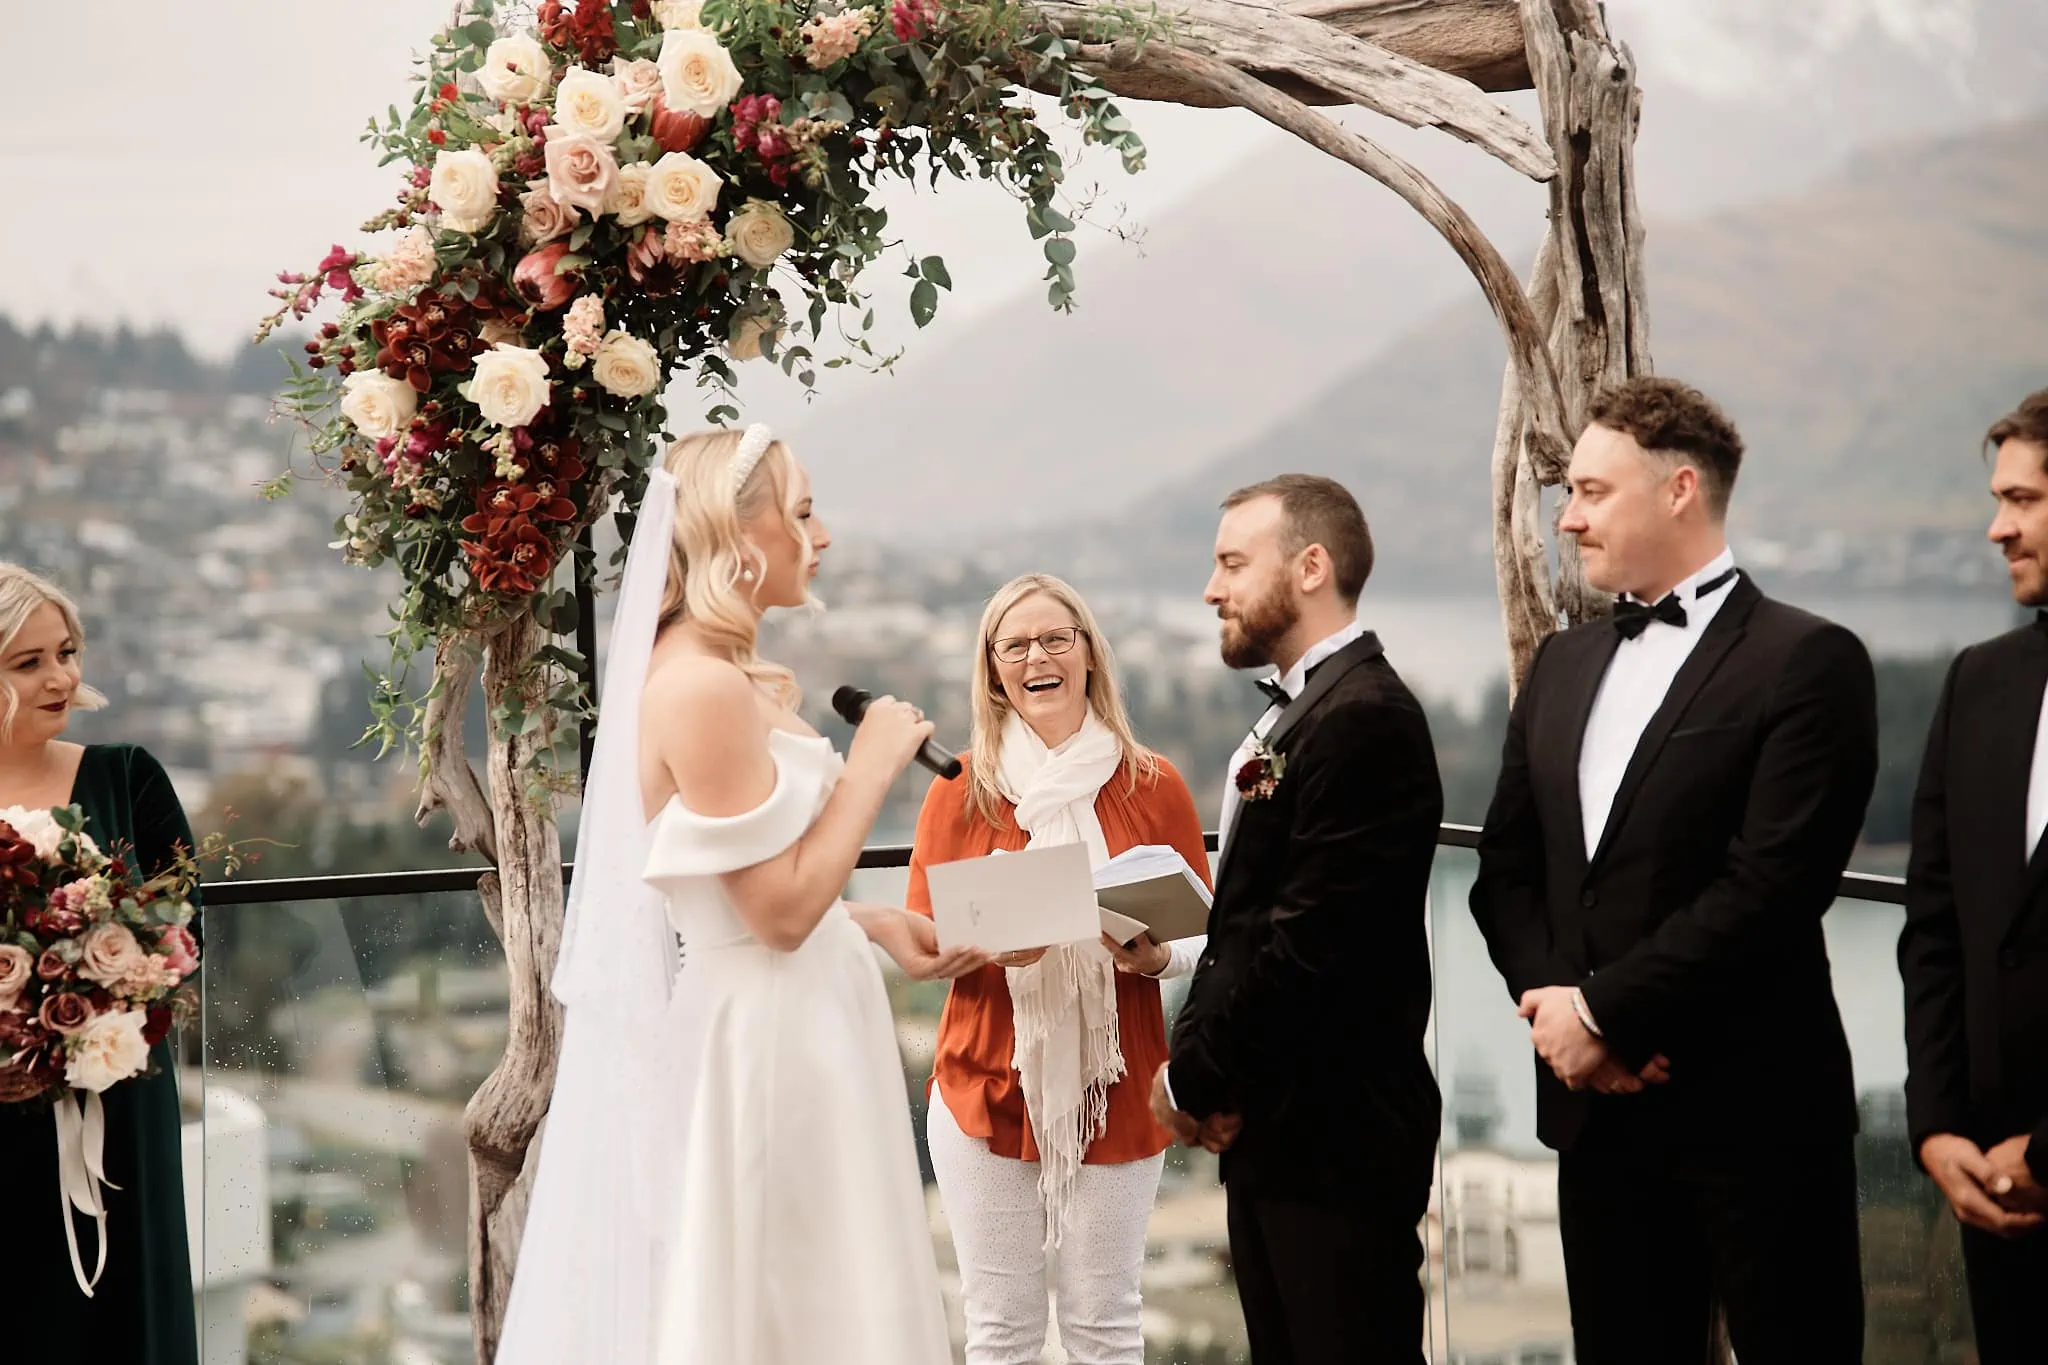 Queenstown New Zealand Elopement Wedding Photographer - A wedding ceremony officiated by Sarah Noble, a Queenstown wedding celebrant.